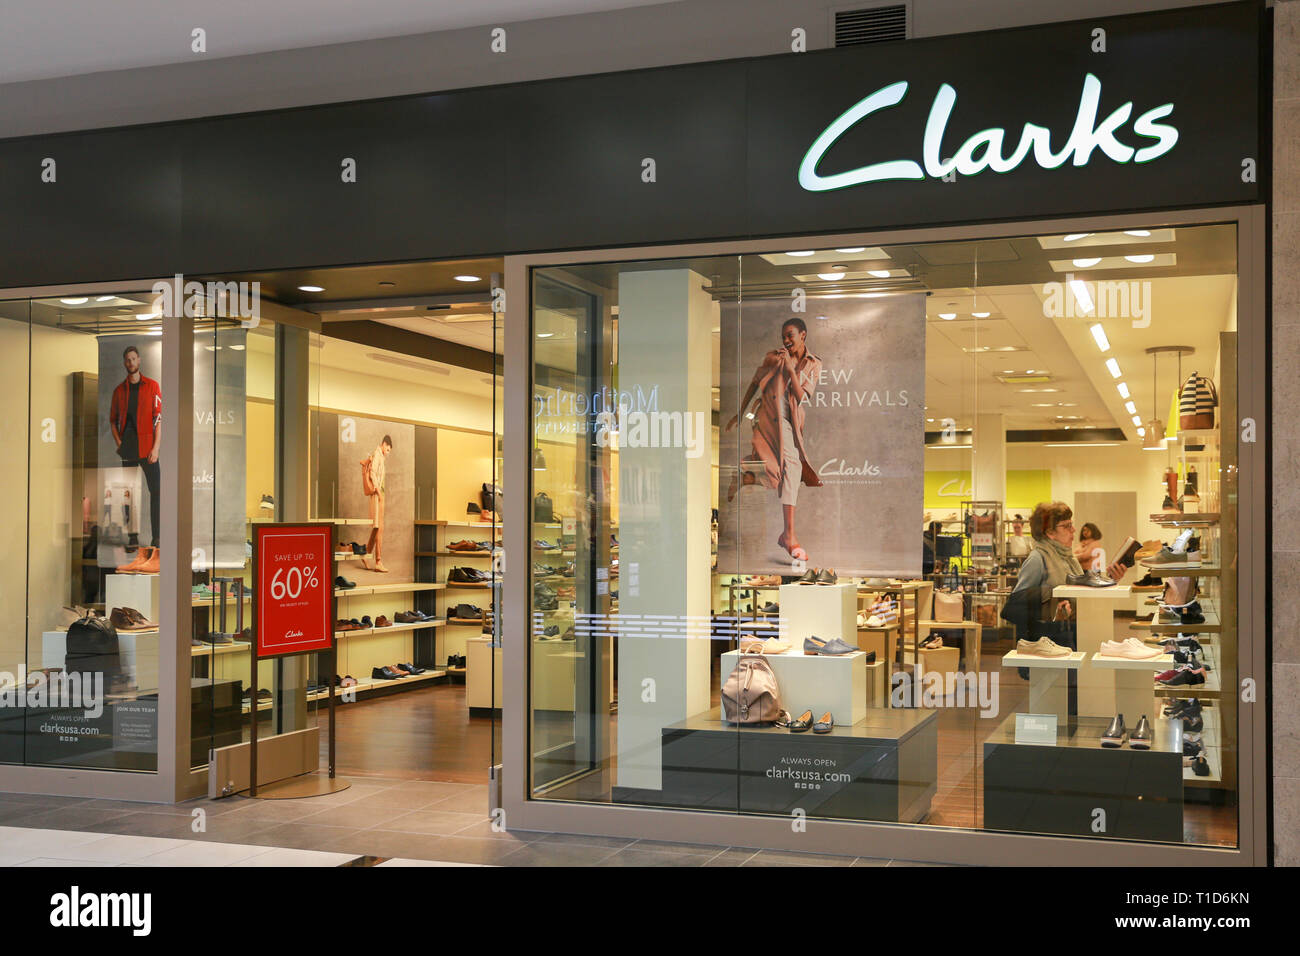 clarks outlet stores scotland